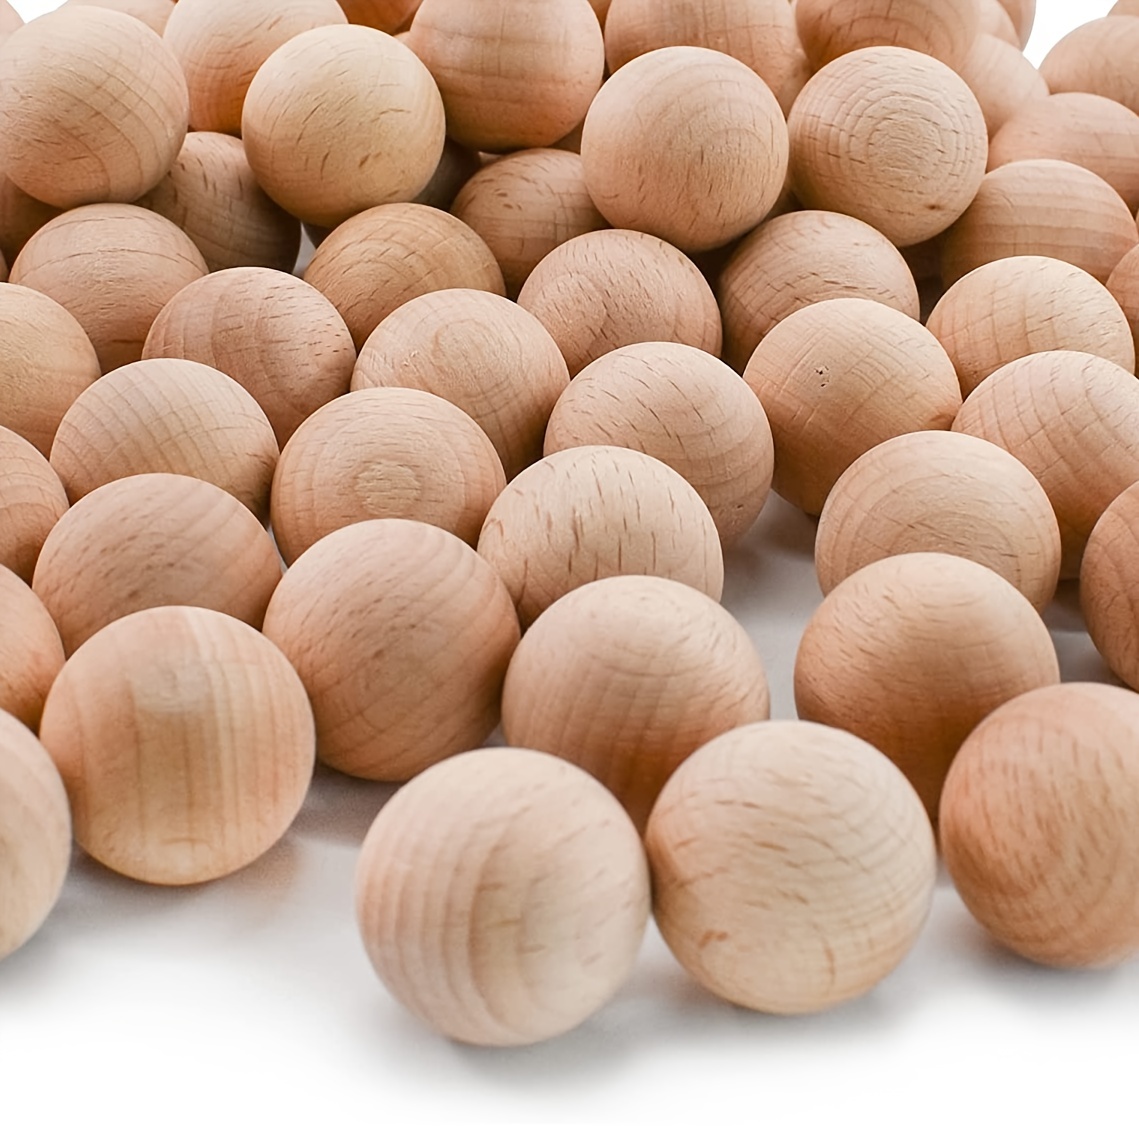 30mm Wood Beads, Bag of 10 Wood Balls for Crafts Unfinished, Wood Rounds  for Crafts and DIY Projects